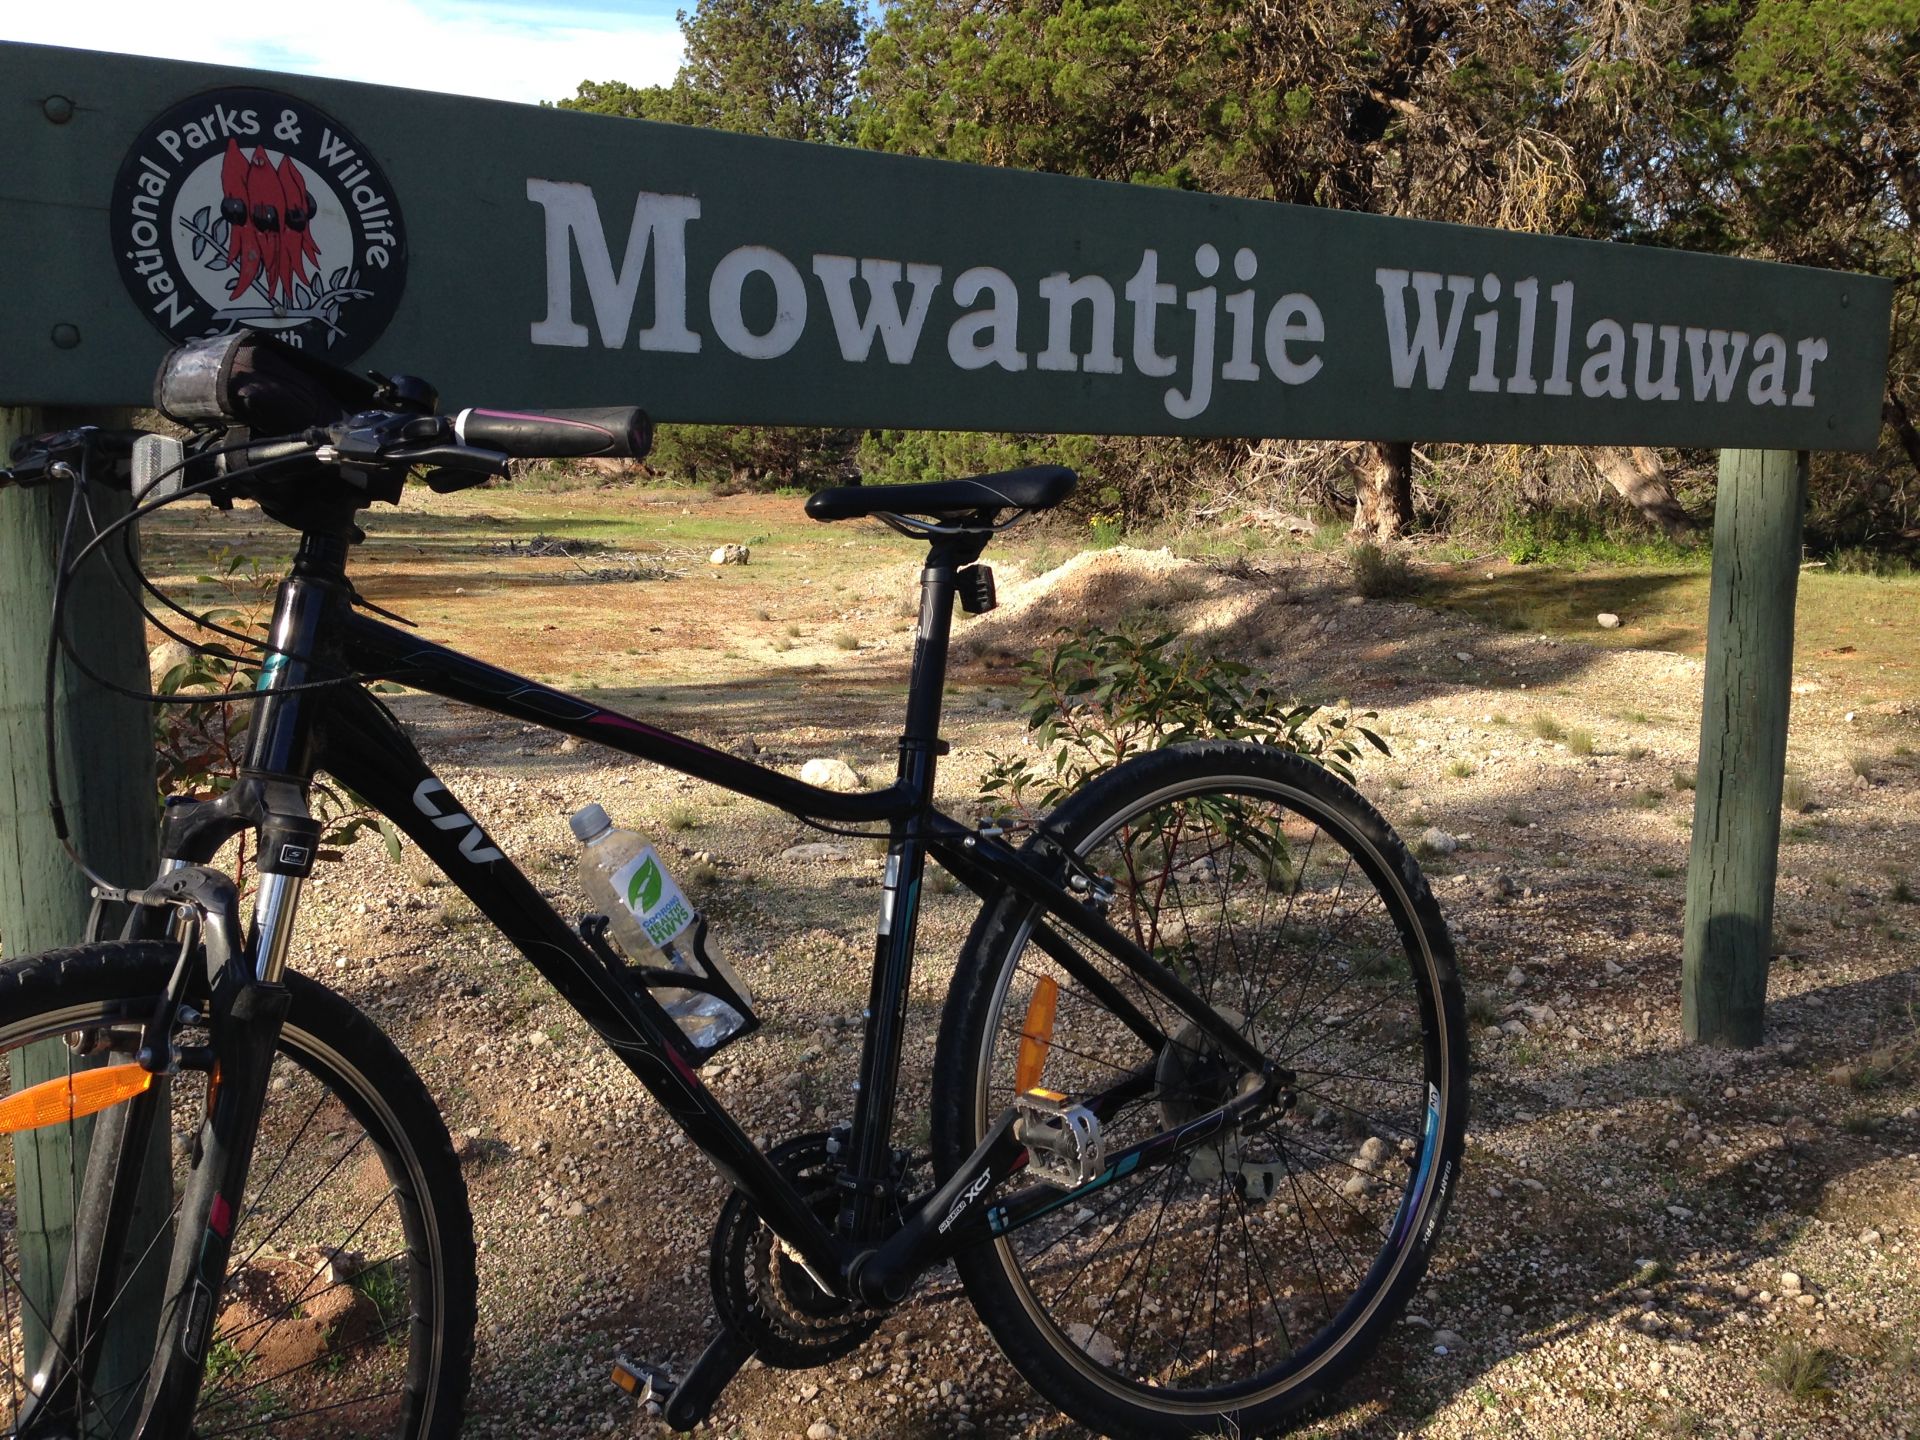 Murray Coorong Trail - bicycle at Mowantjie Sign